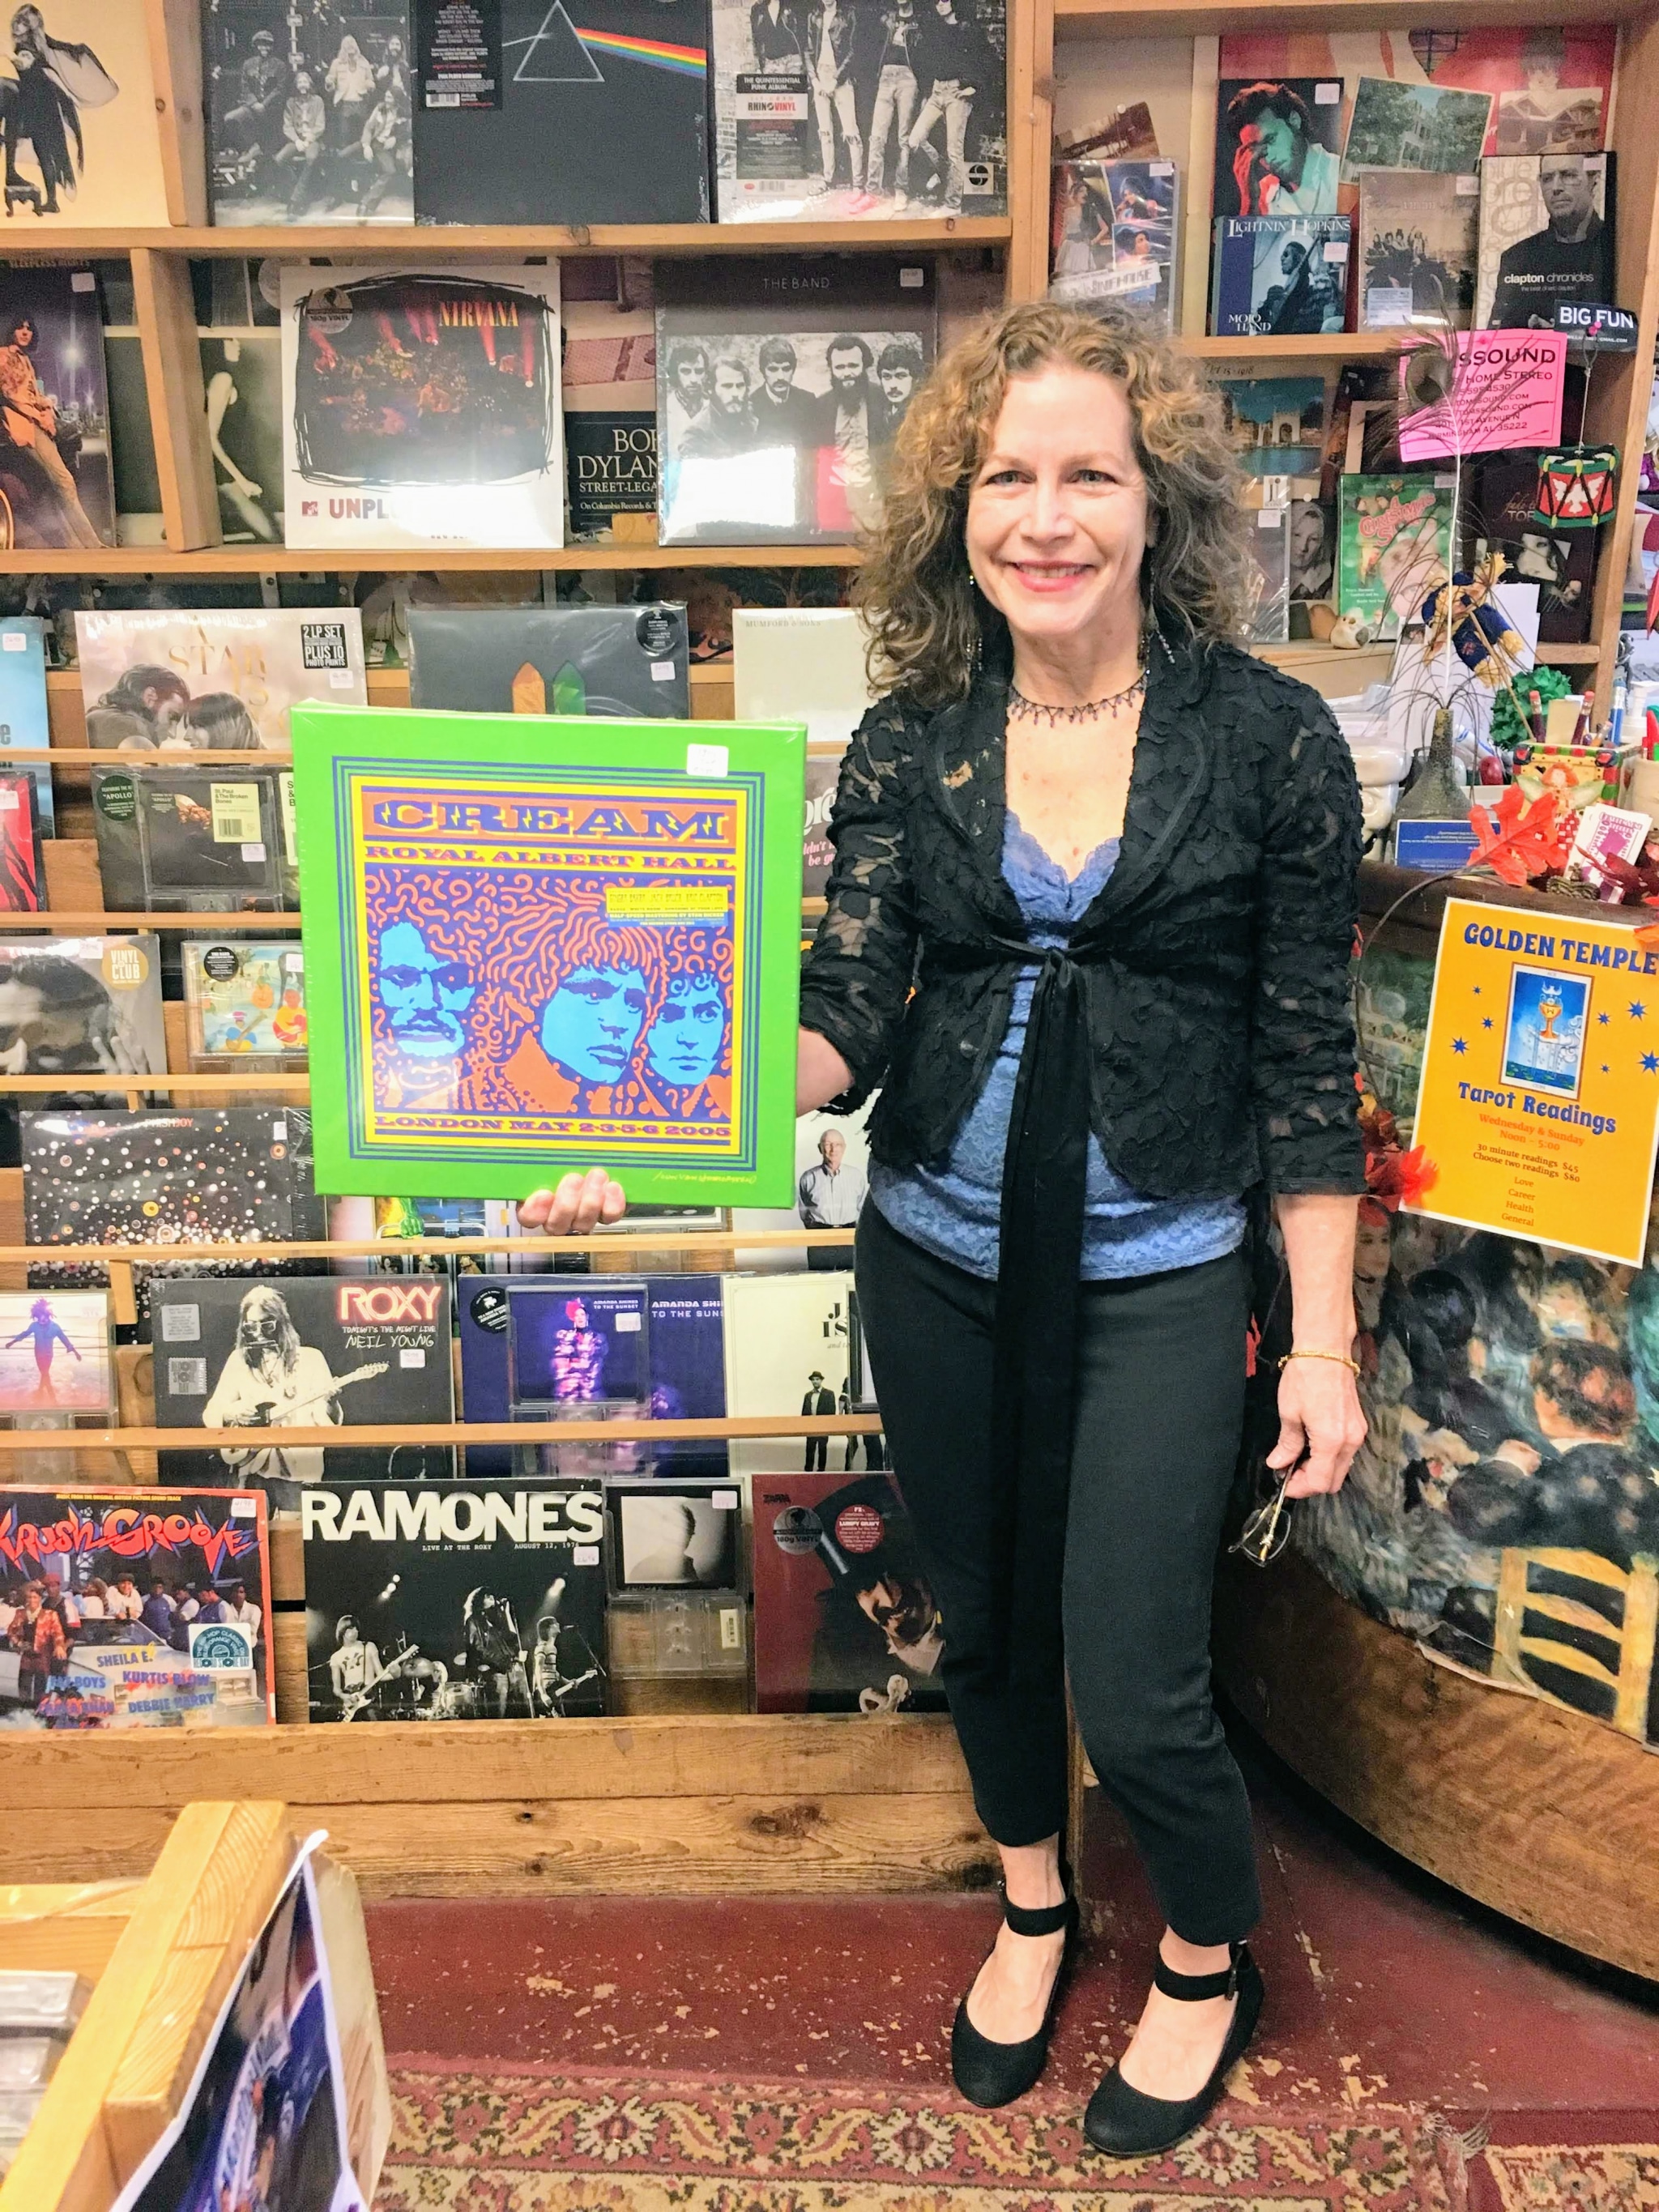 Charlemange's is one of the Birmingham record stores that houses many treasures.